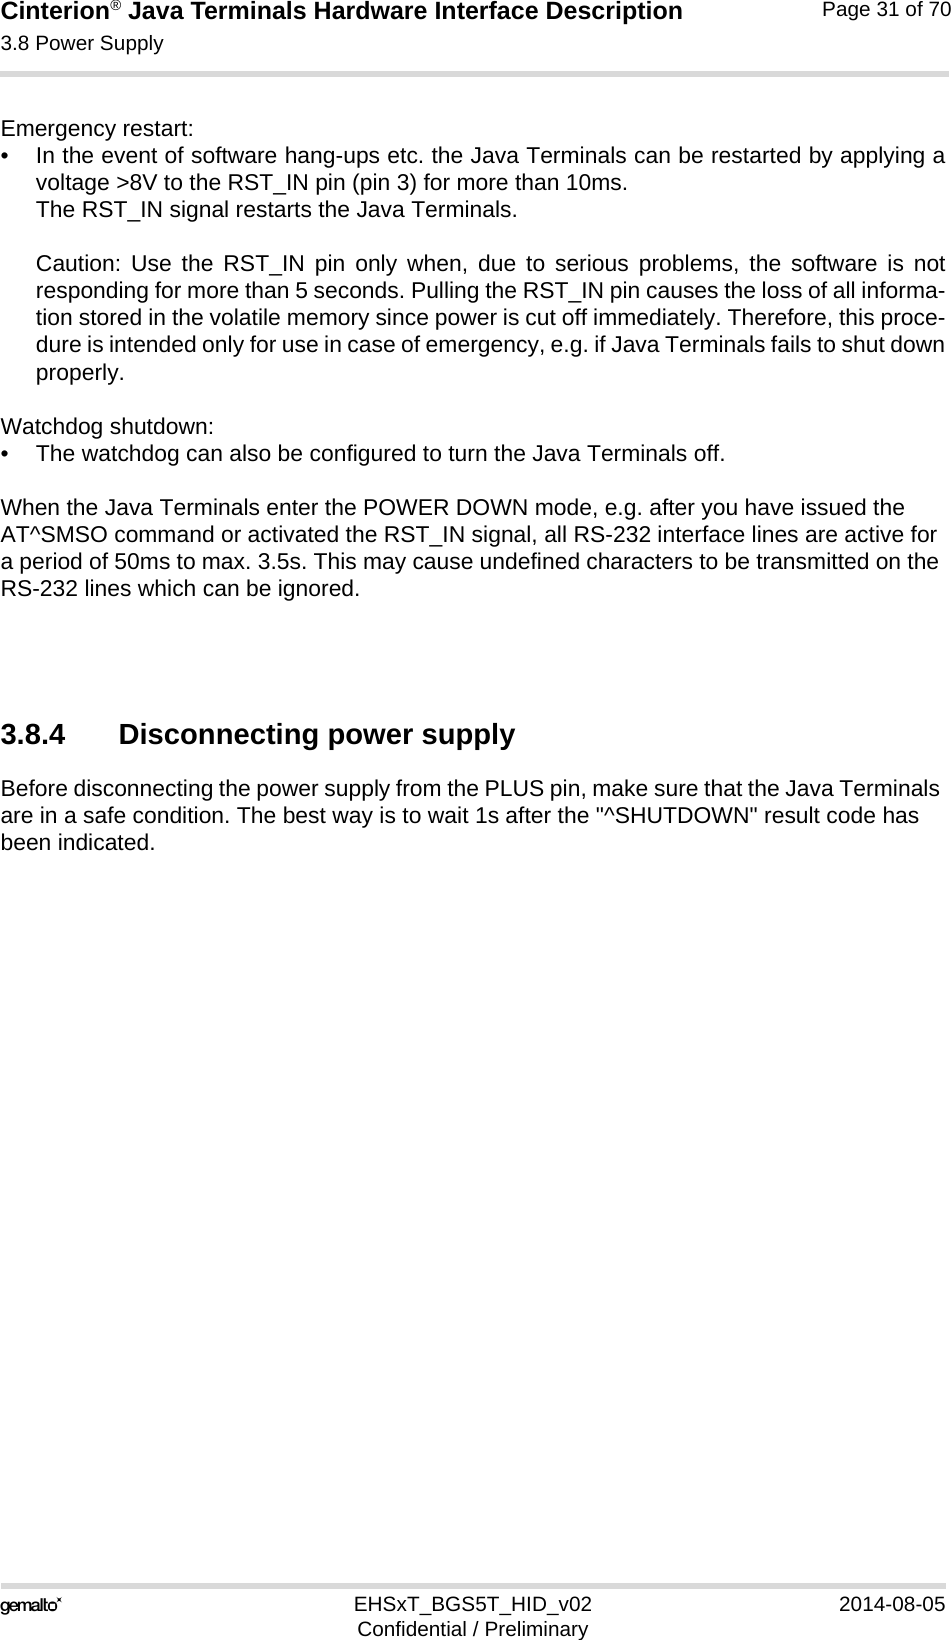 Cinterion® Java Terminals Hardware Interface Description3.8 Power Supply35EHSxT_BGS5T_HID_v02 2014-08-05Confidential / PreliminaryPage 31 of 70Emergency restart: • In the event of software hang-ups etc. the Java Terminals can be restarted by applying avoltage &gt;8V to the RST_IN pin (pin 3) for more than 10ms. The RST_IN signal restarts the Java Terminals.Caution: Use the RST_IN pin only when, due to serious problems, the software is notresponding for more than 5 seconds. Pulling the RST_IN pin causes the loss of all informa-tion stored in the volatile memory since power is cut off immediately. Therefore, this proce-dure is intended only for use in case of emergency, e.g. if Java Terminals fails to shut downproperly.Watchdog shutdown:• The watchdog can also be configured to turn the Java Terminals off.When the Java Terminals enter the POWER DOWN mode, e.g. after you have issued the AT^SMSO command or activated the RST_IN signal, all RS-232 interface lines are active for a period of 50ms to max. 3.5s. This may cause undefined characters to be transmitted on the RS-232 lines which can be ignored.3.8.4 Disconnecting power supplyBefore disconnecting the power supply from the PLUS pin, make sure that the Java Terminals are in a safe condition. The best way is to wait 1s after the &quot;^SHUTDOWN&quot; result code has been indicated. 